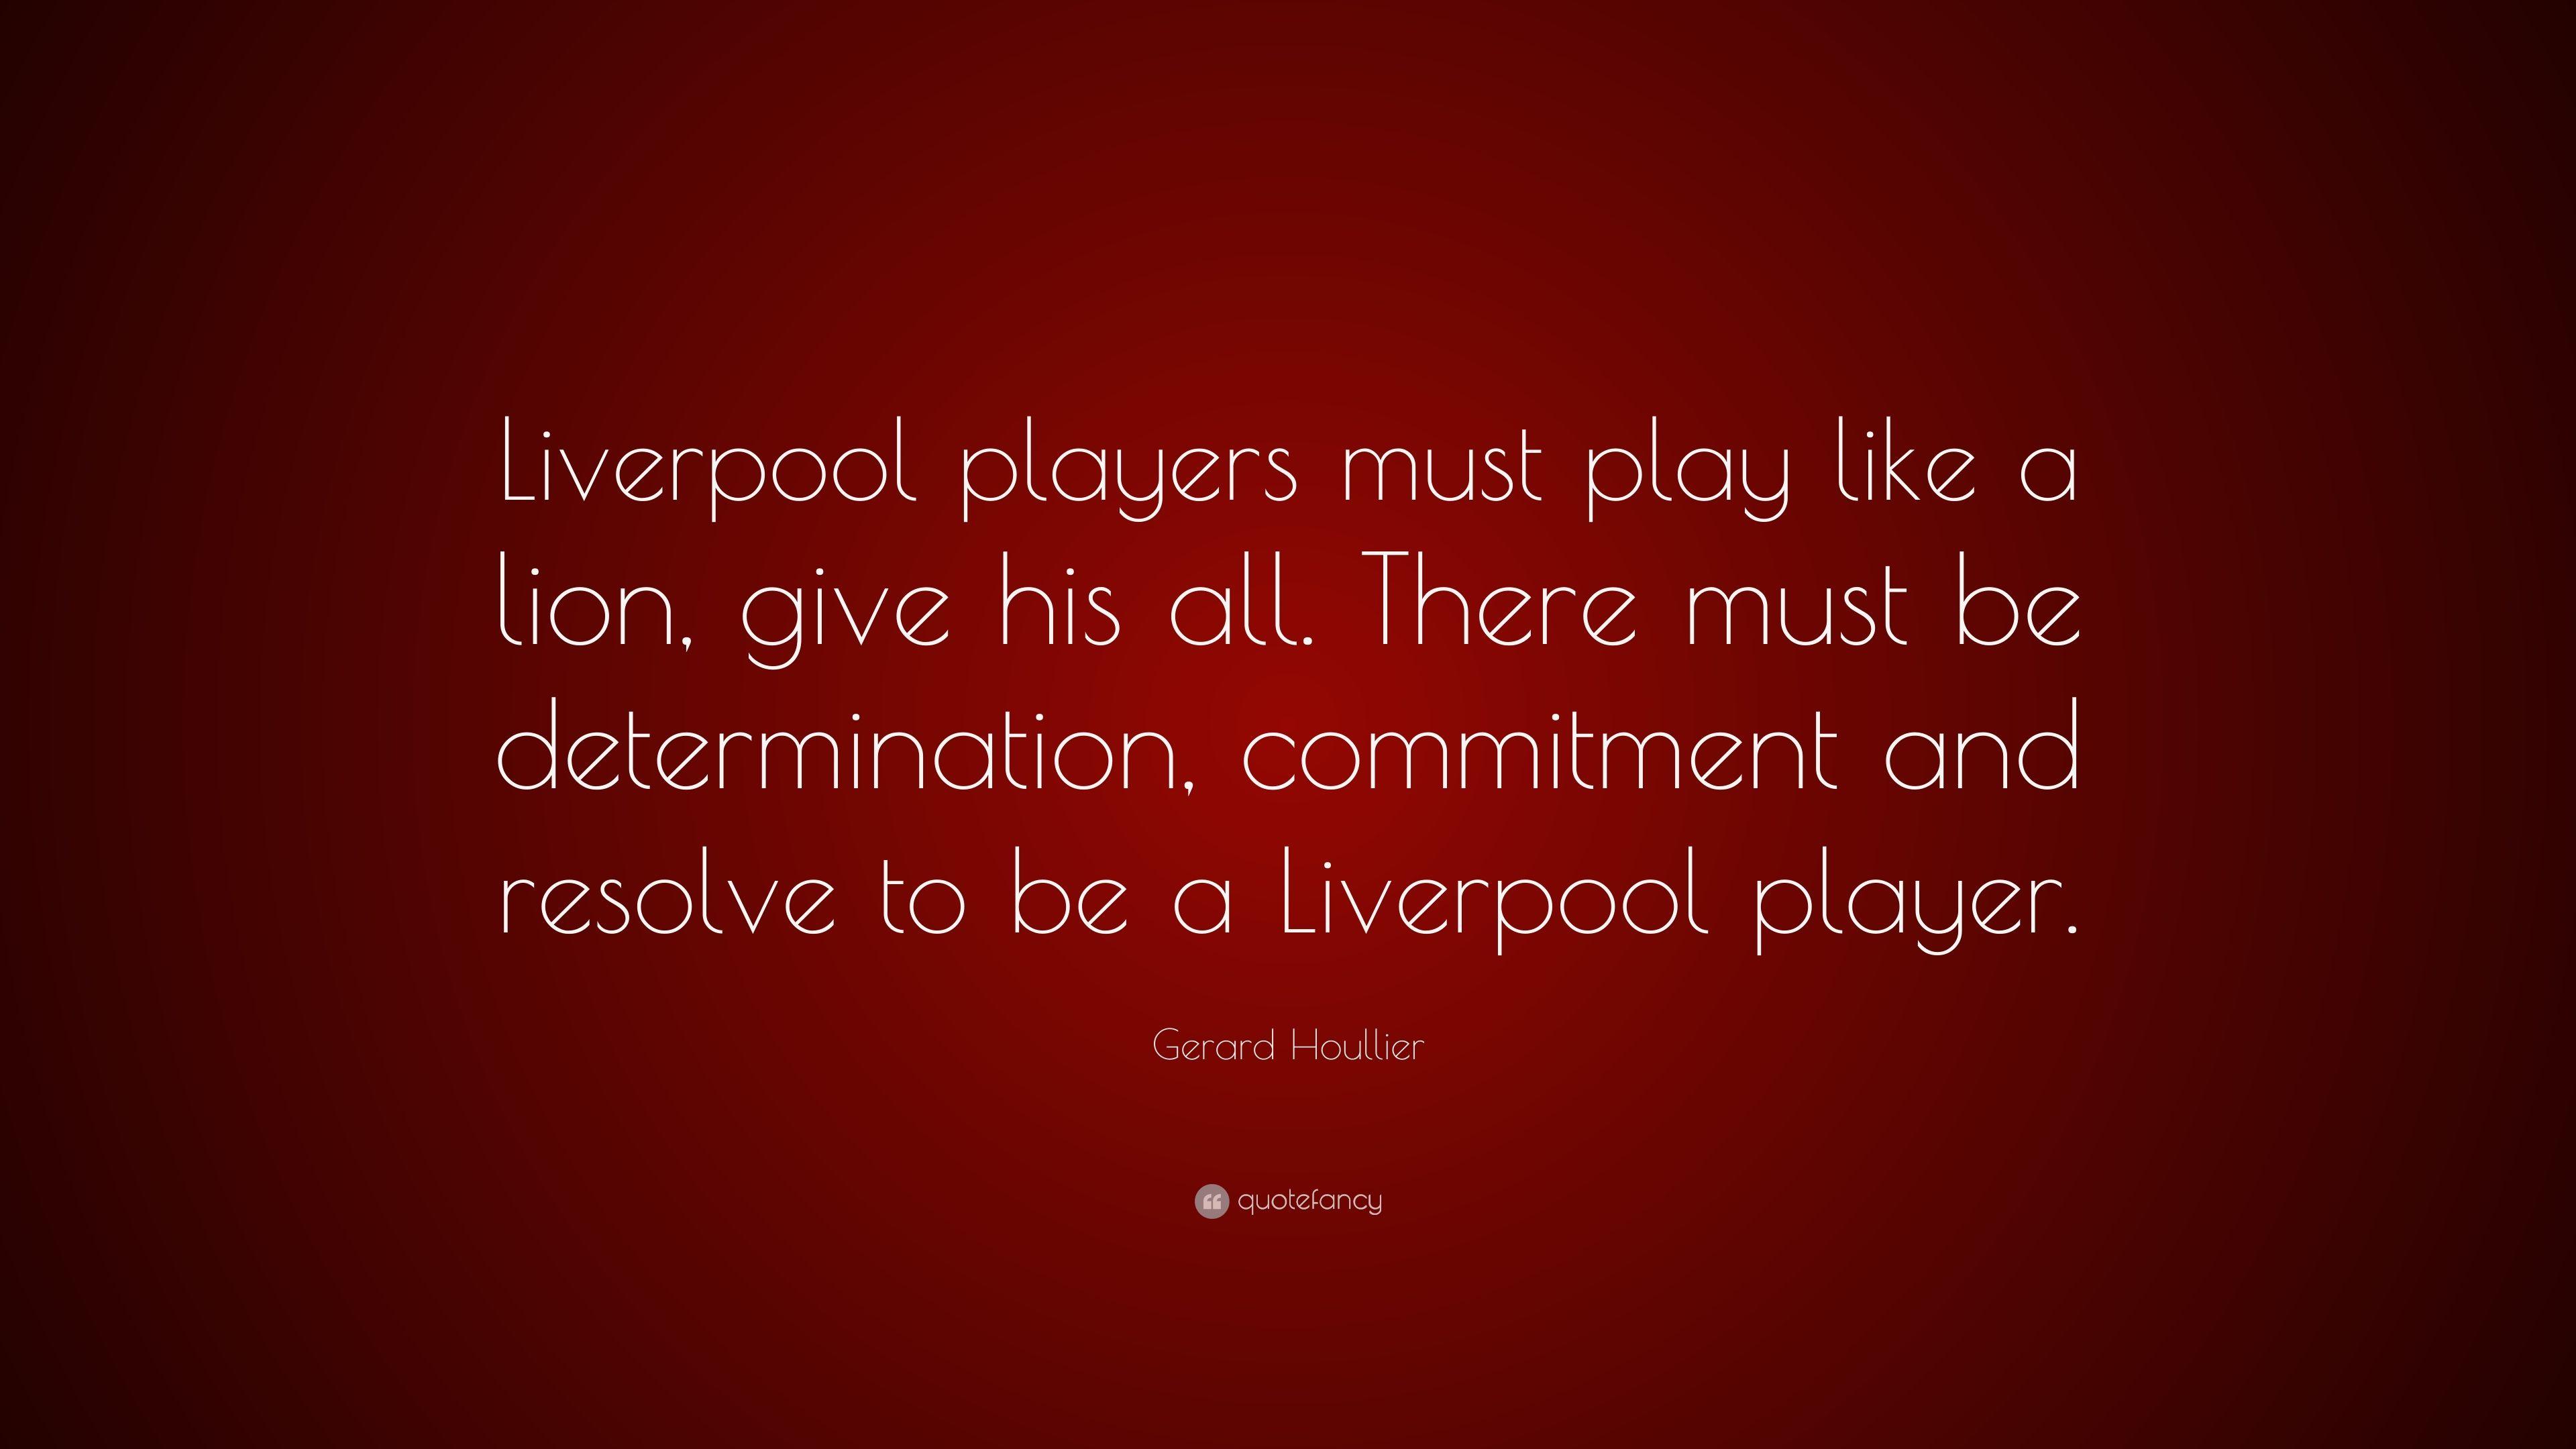 Gerard Houllier Quote: “Liverpool players must play like a lion